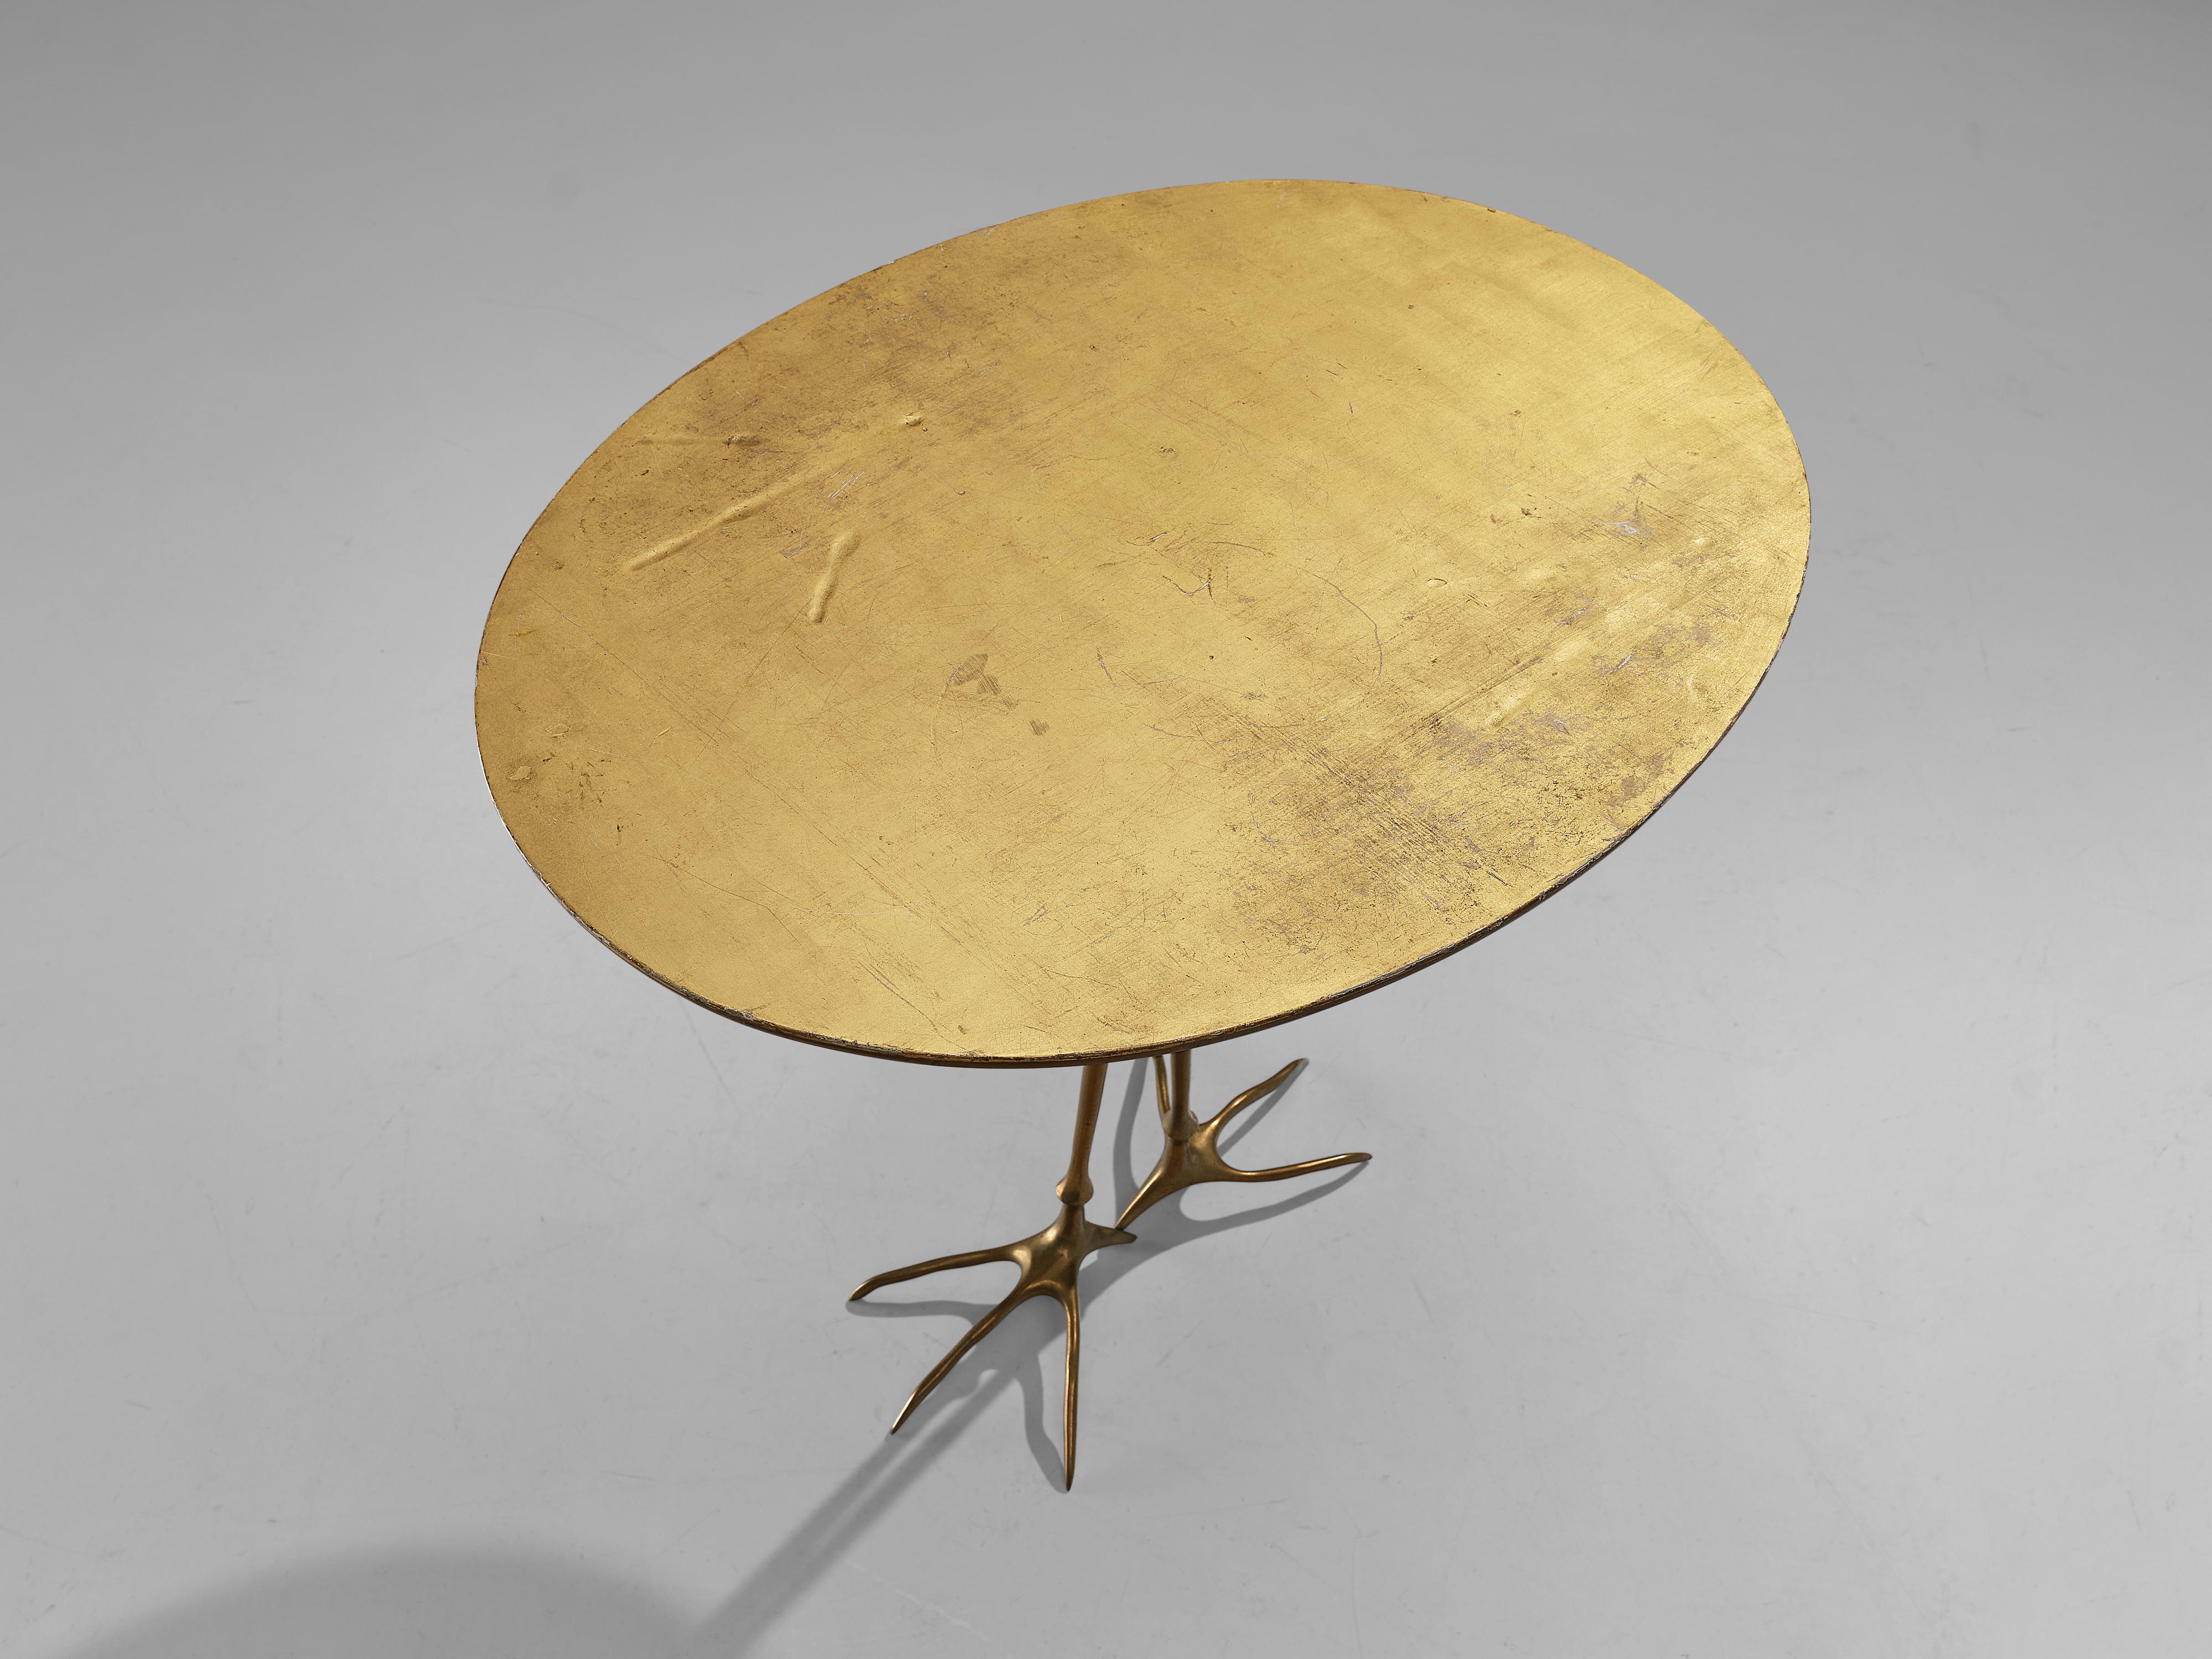 Meret Oppenheim 'Traccia' Coffee Table in Gilded Wood and Brass  4